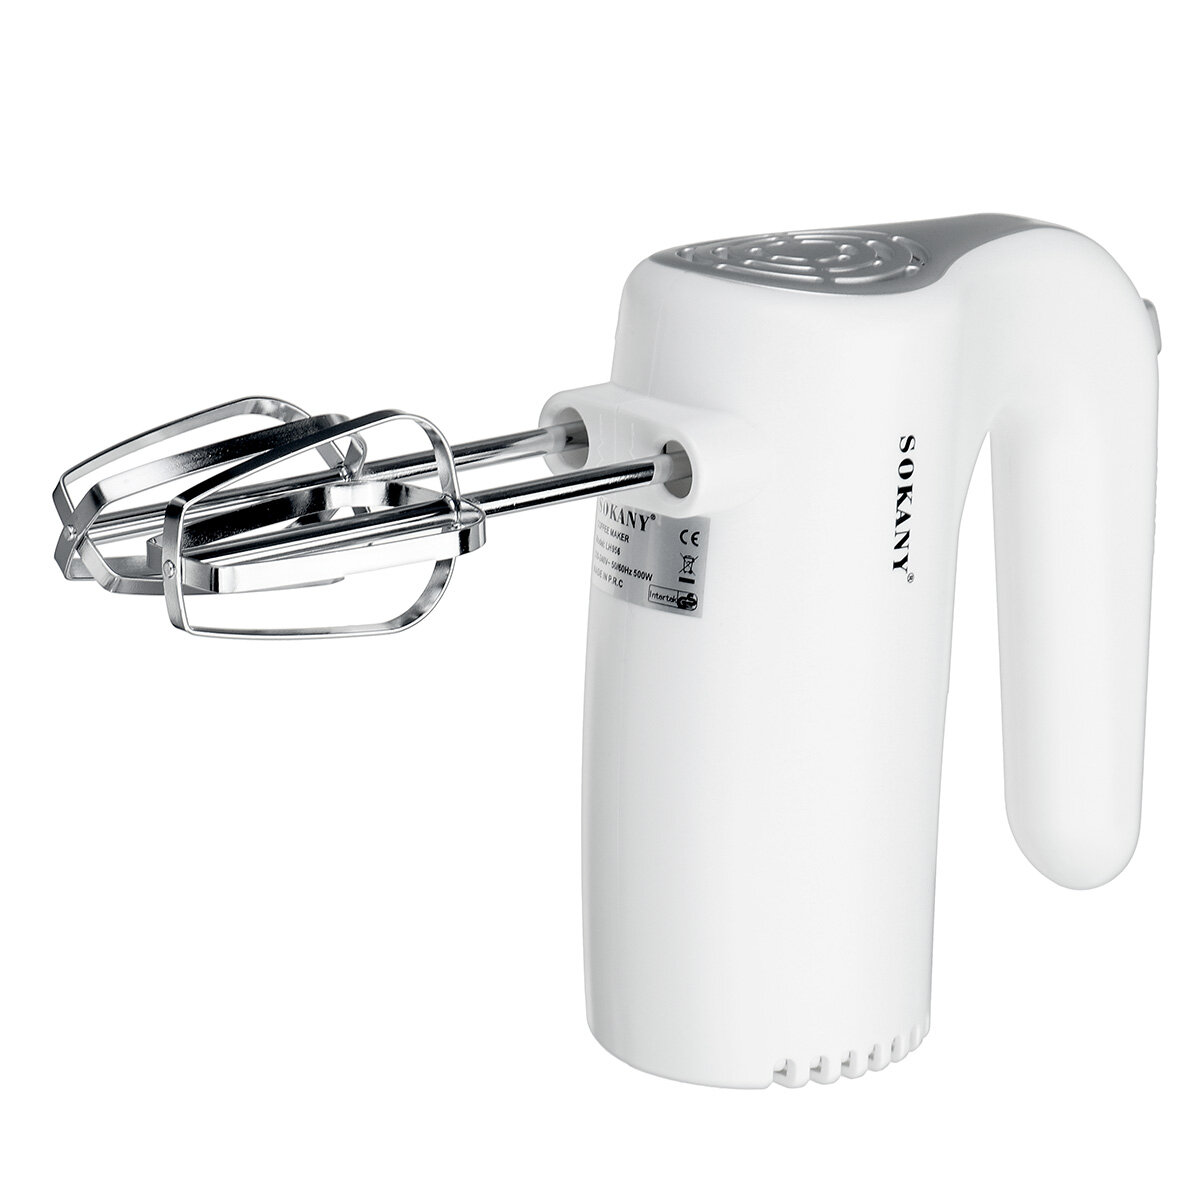 

SOKANY 500W Kitchen Electric Hand Mixer with 5 Speeds Whisk with Egg Beater Dough Hook